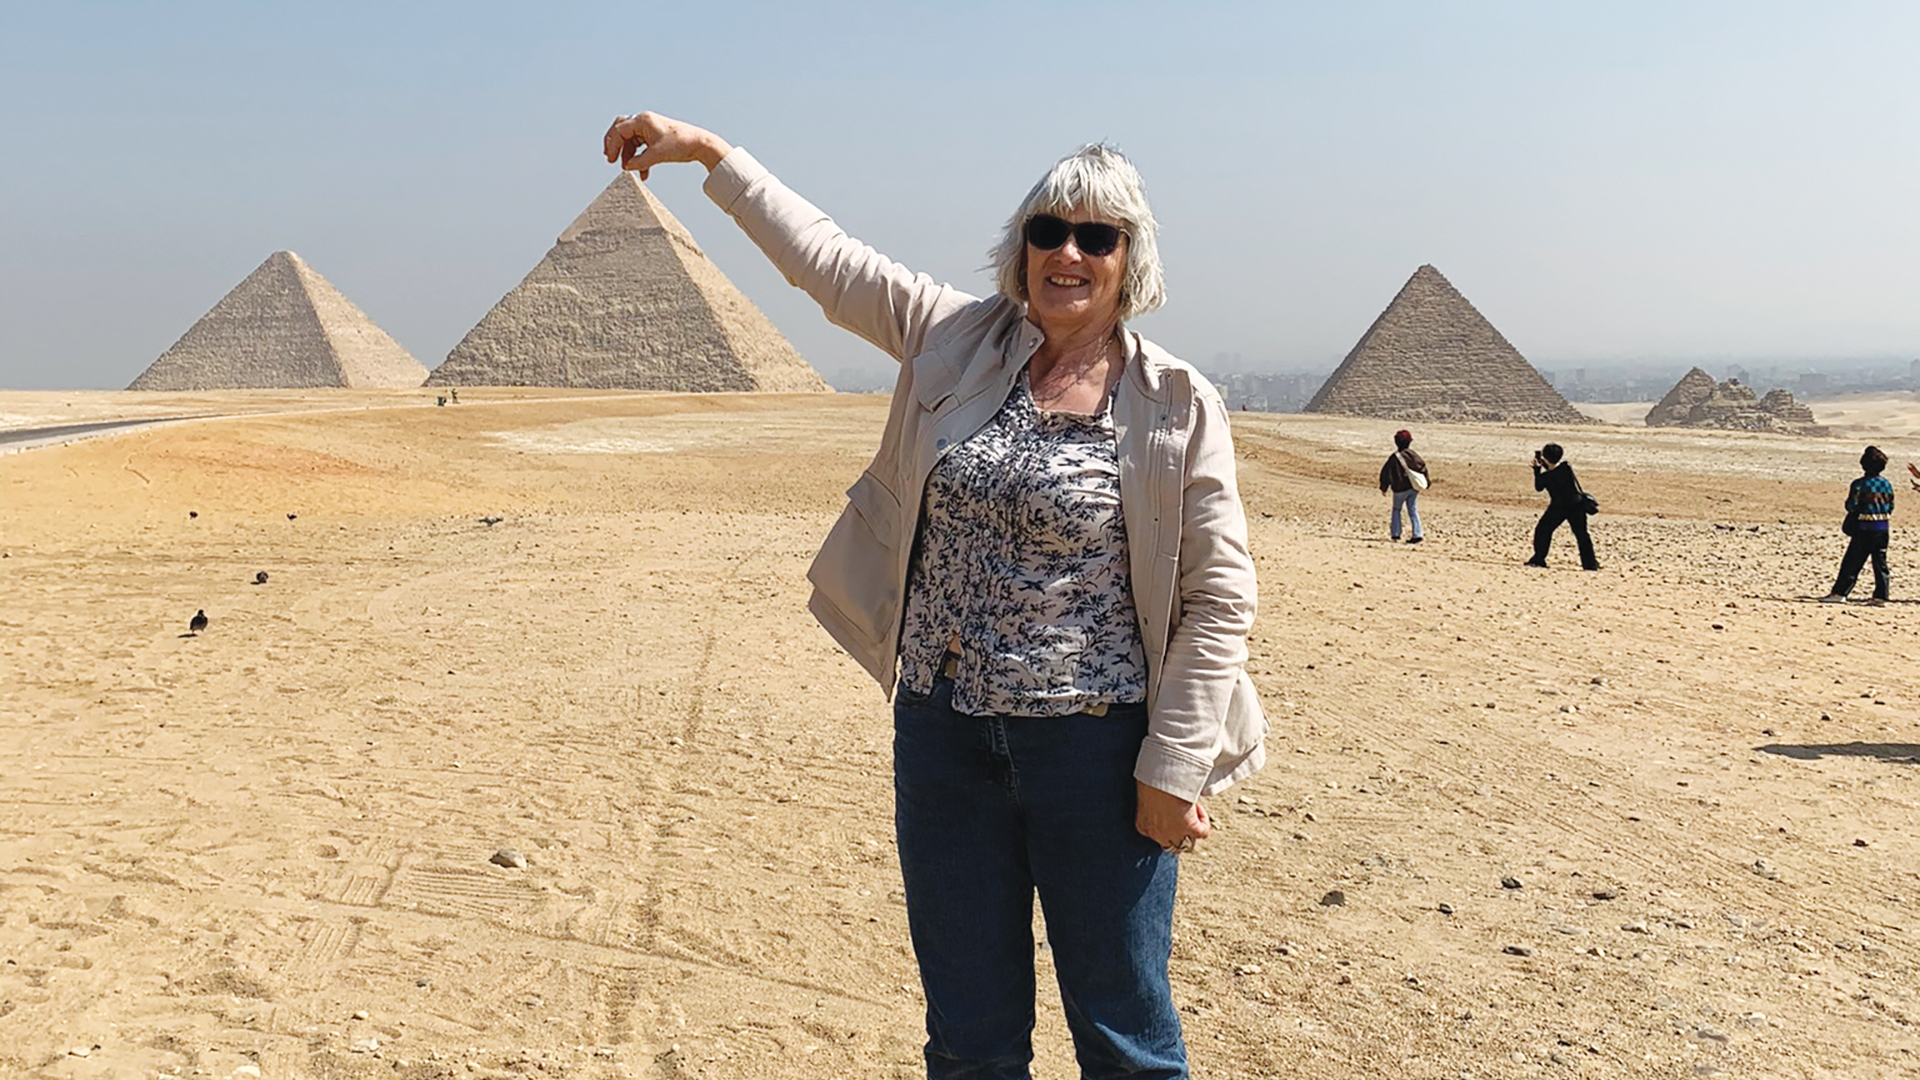 A woman poses beside pyramids